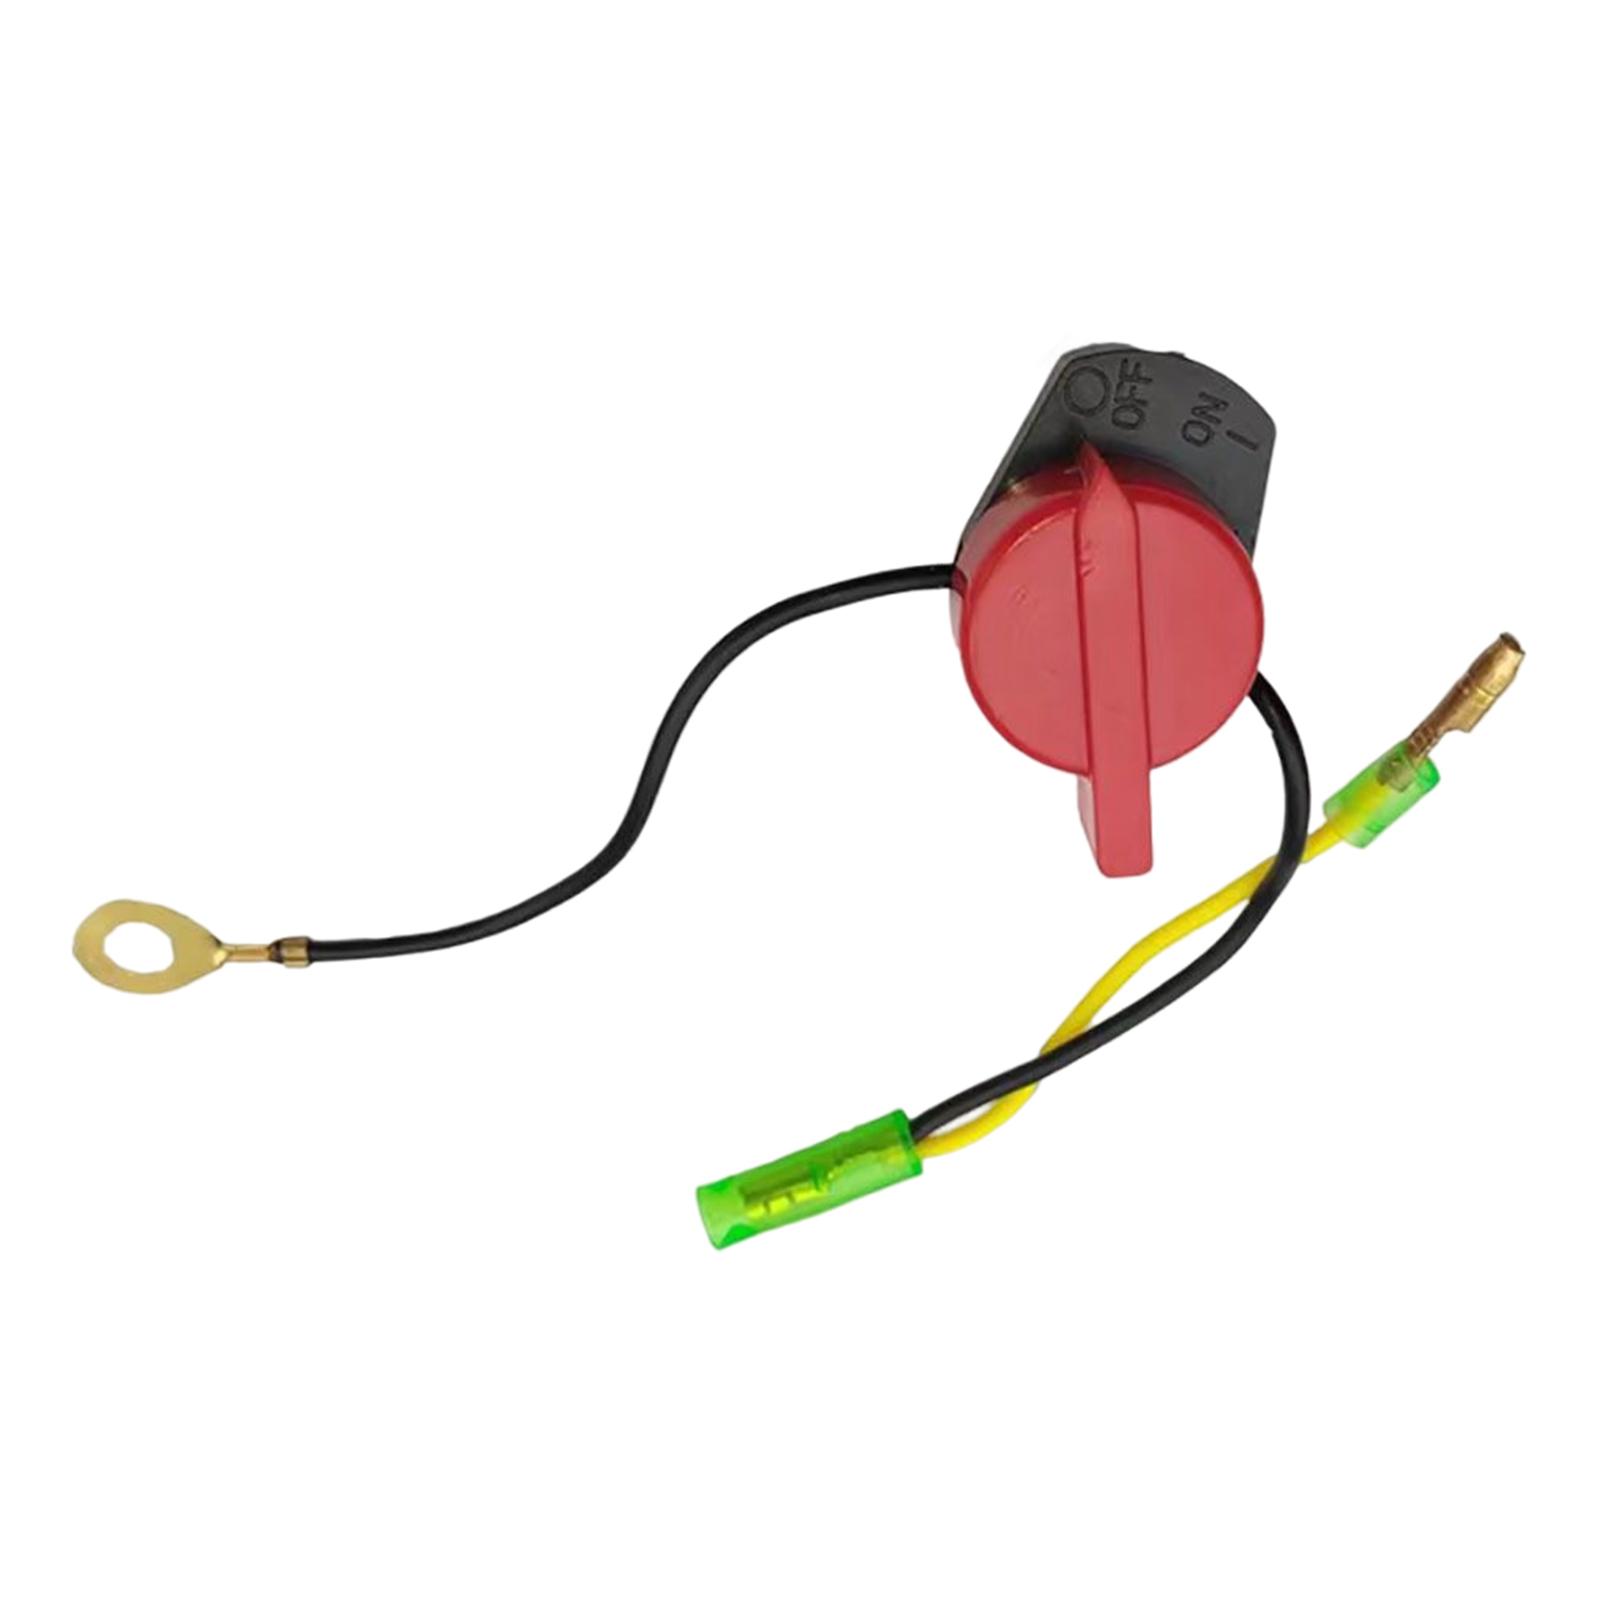 3 On/Off Engine Stop Switch for Gx190 Gx170